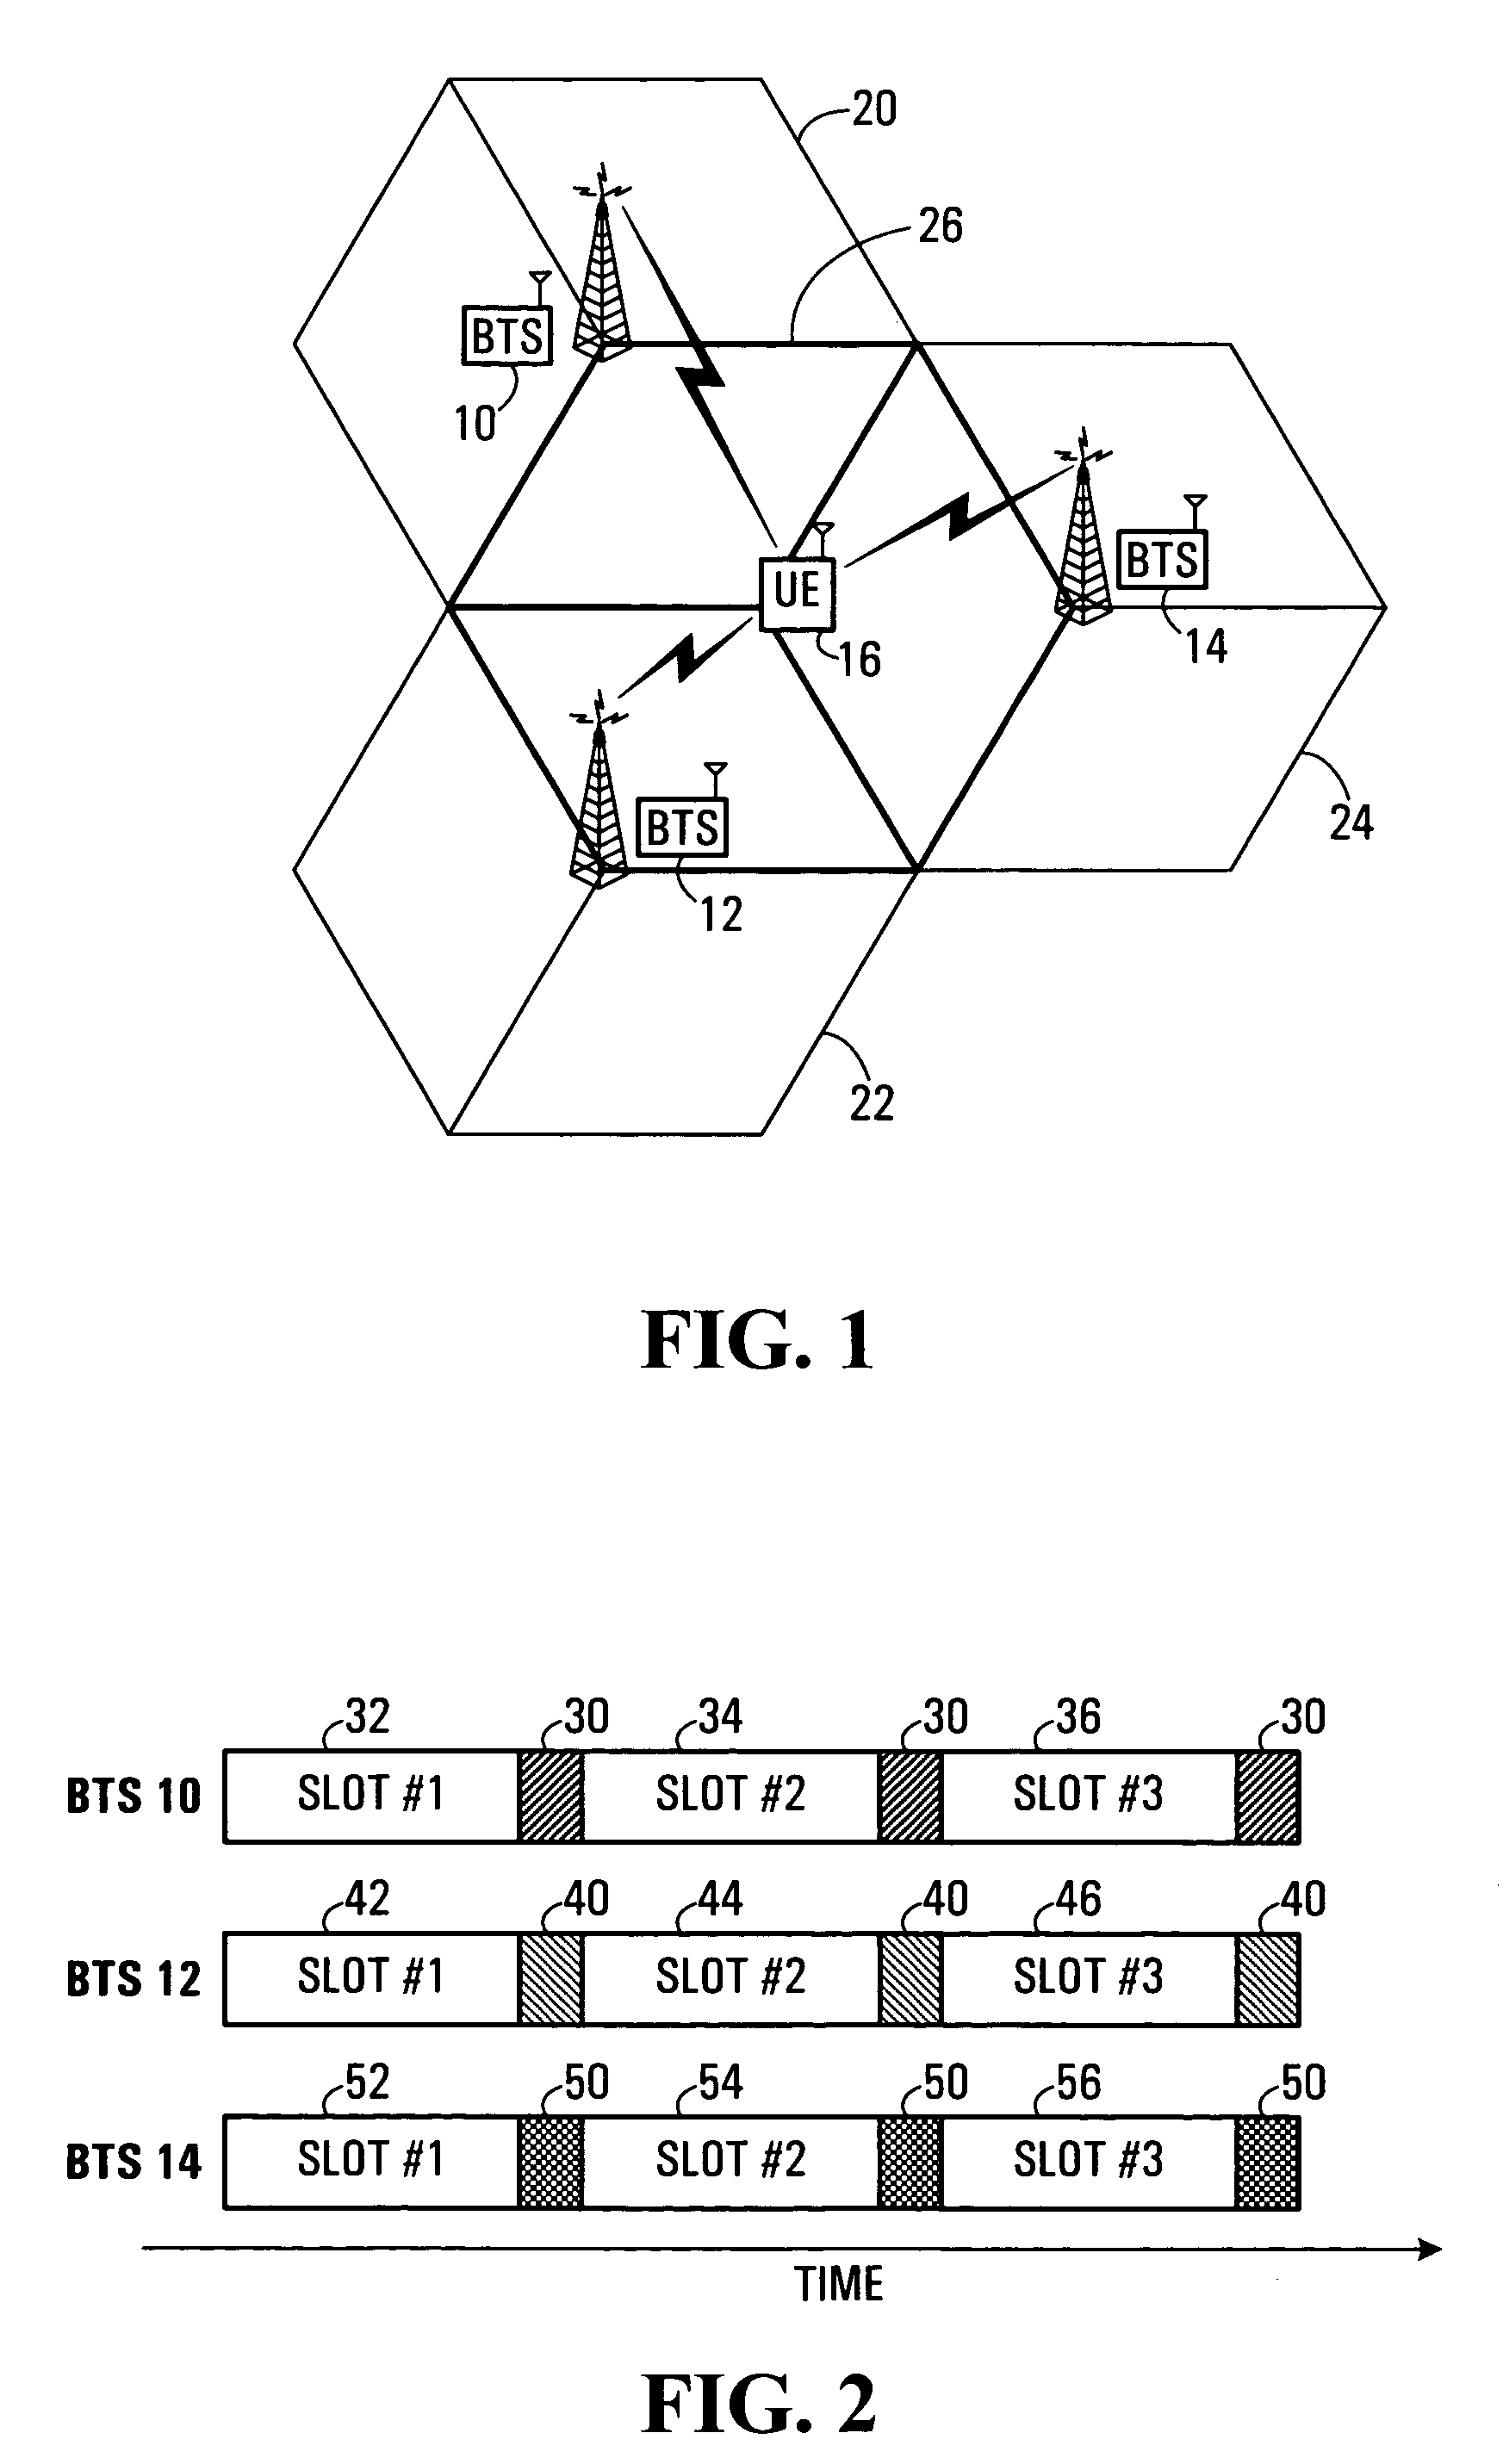 Physical layer structures and initial access schemes in an unsynchronized communication network